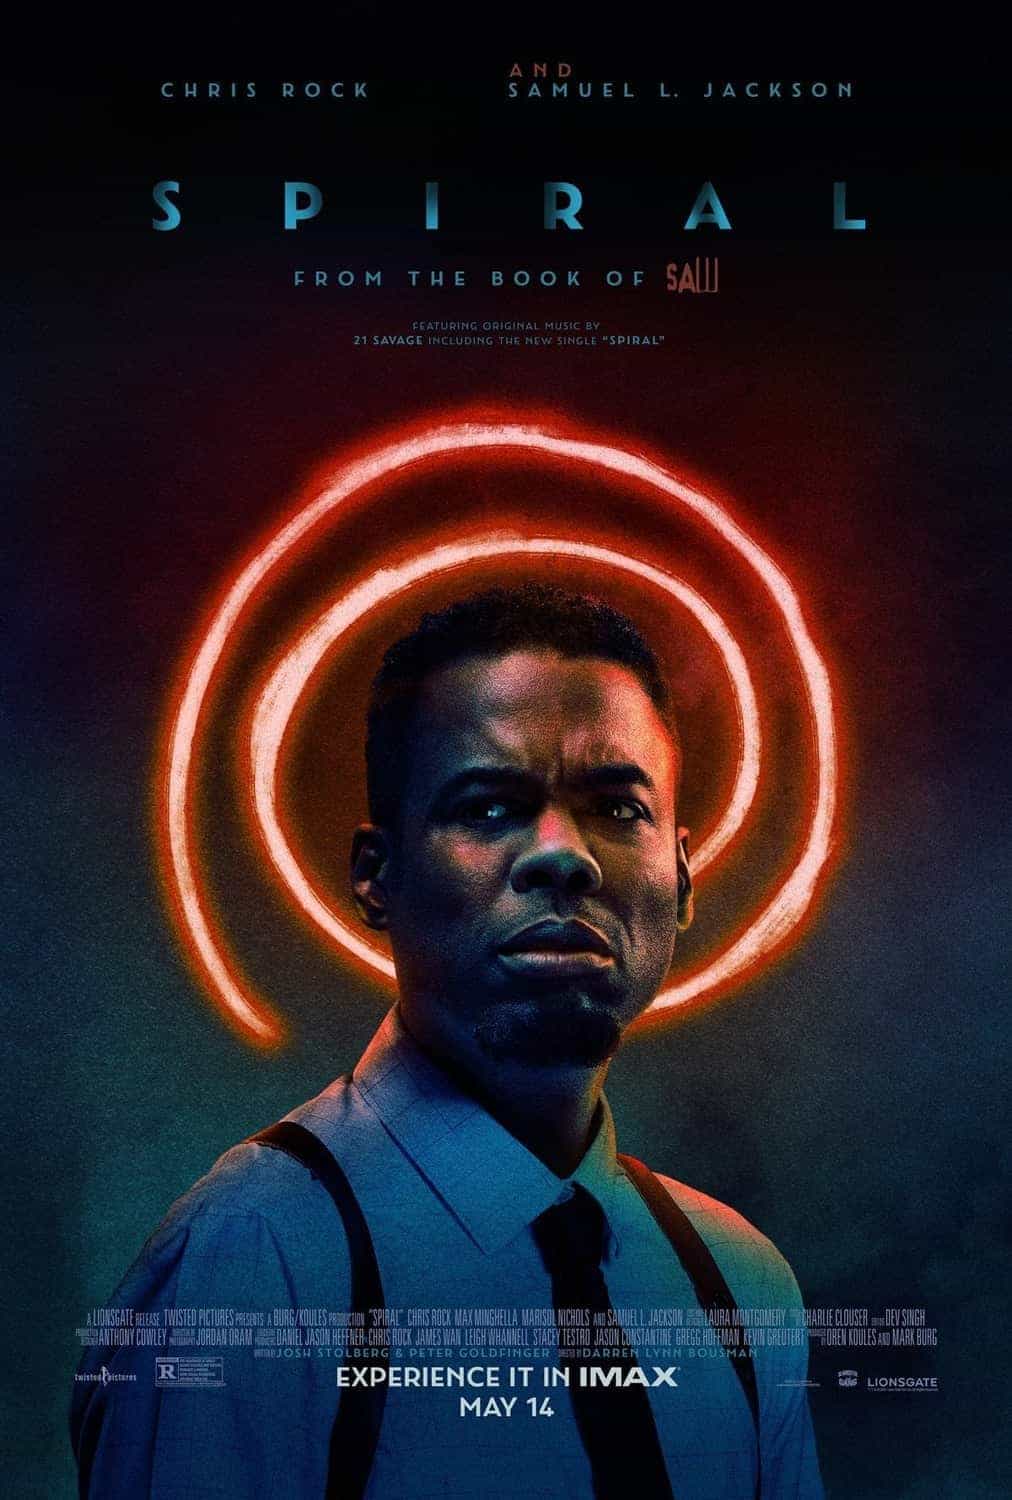 First trailer for the Saw reboot project headed up by Chris Rock - Spiral: From The Book Of Saw